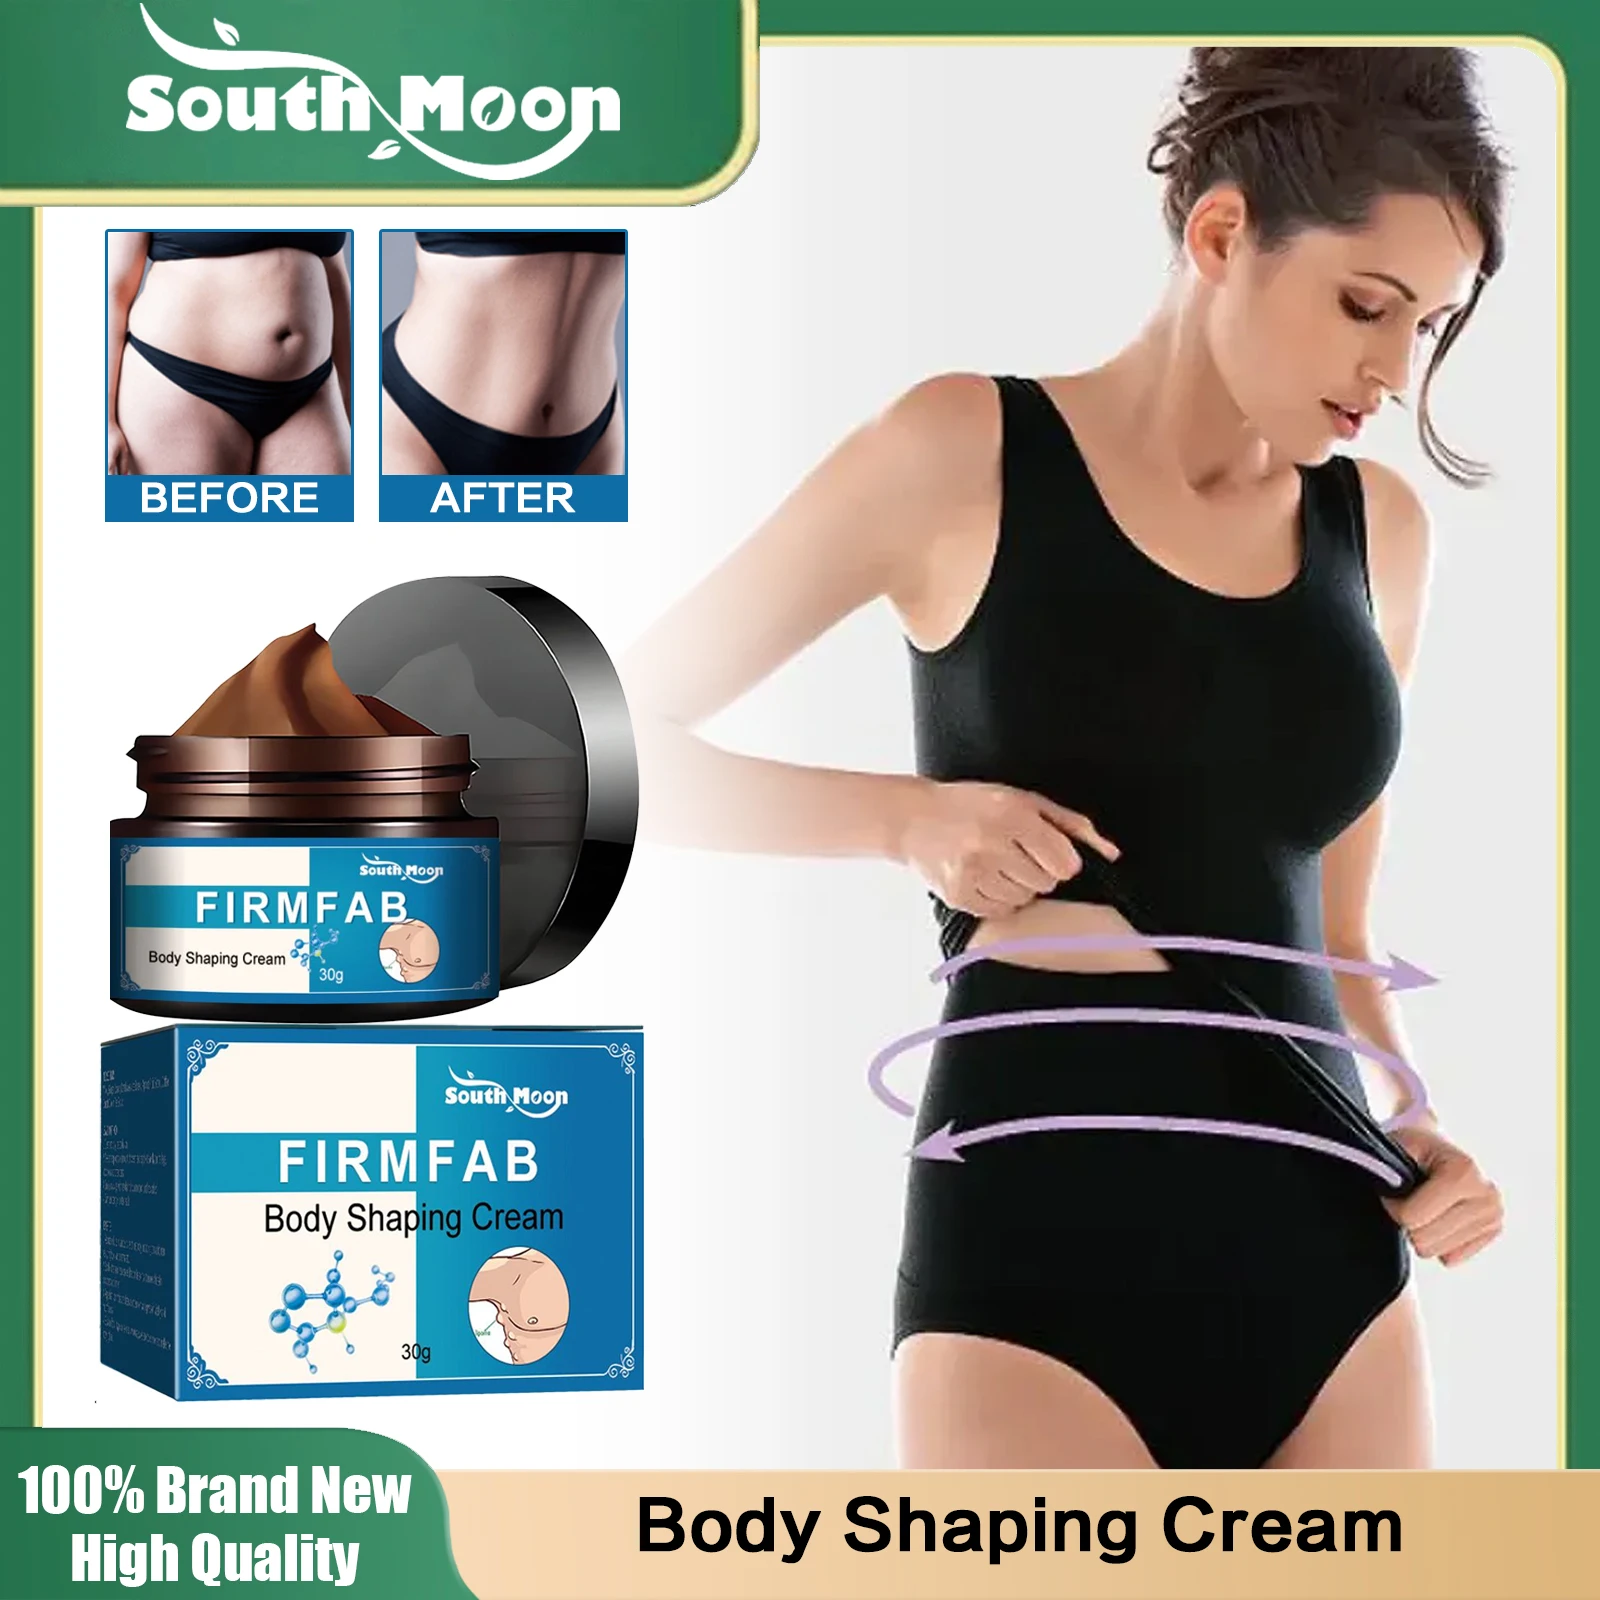 

South Moon Fat Burning Slimming Cream Anti Cellulite Waist Tummy Thighs Arm Firming Shaping Body Sculpting Massage Beauty Health